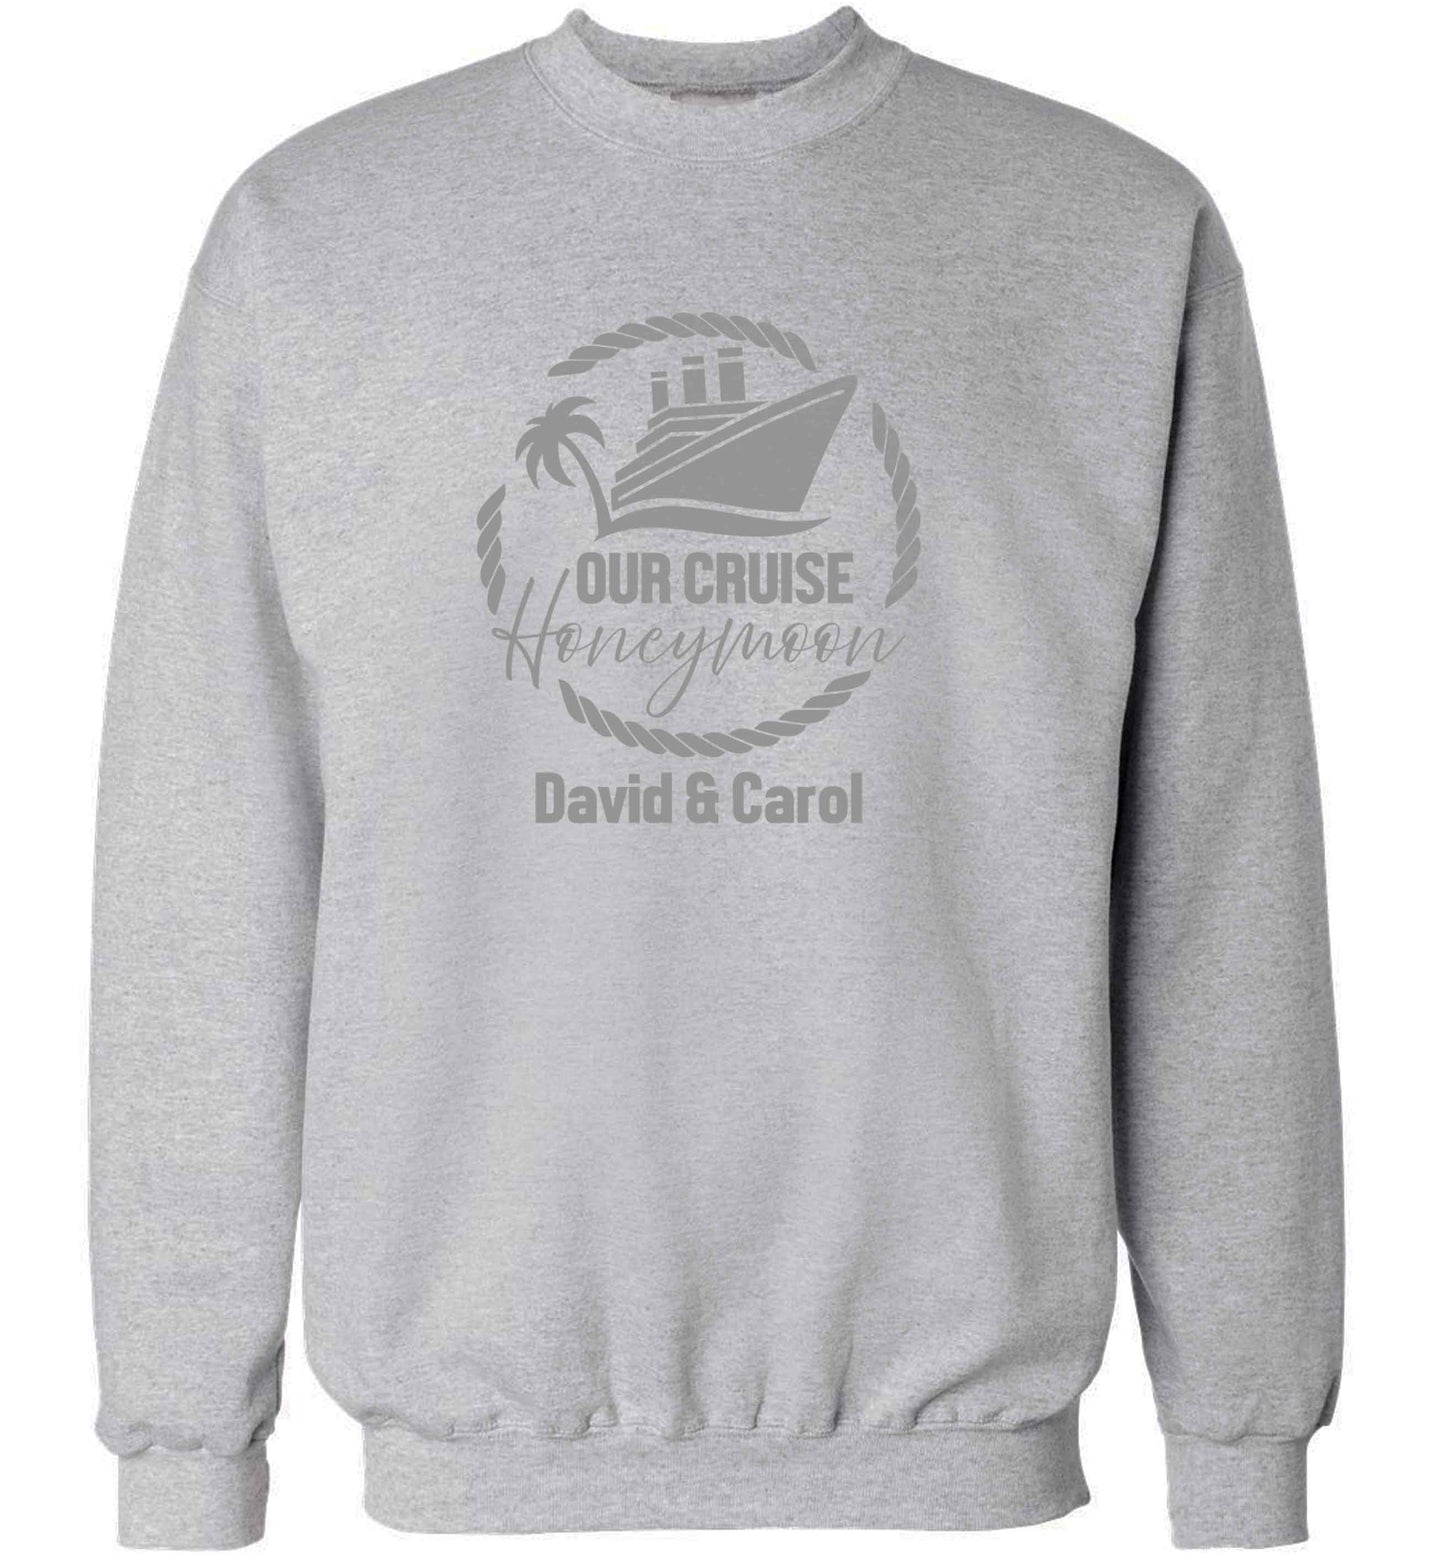 Our cruise honeymoon personalised adult's unisex grey sweater 2XL